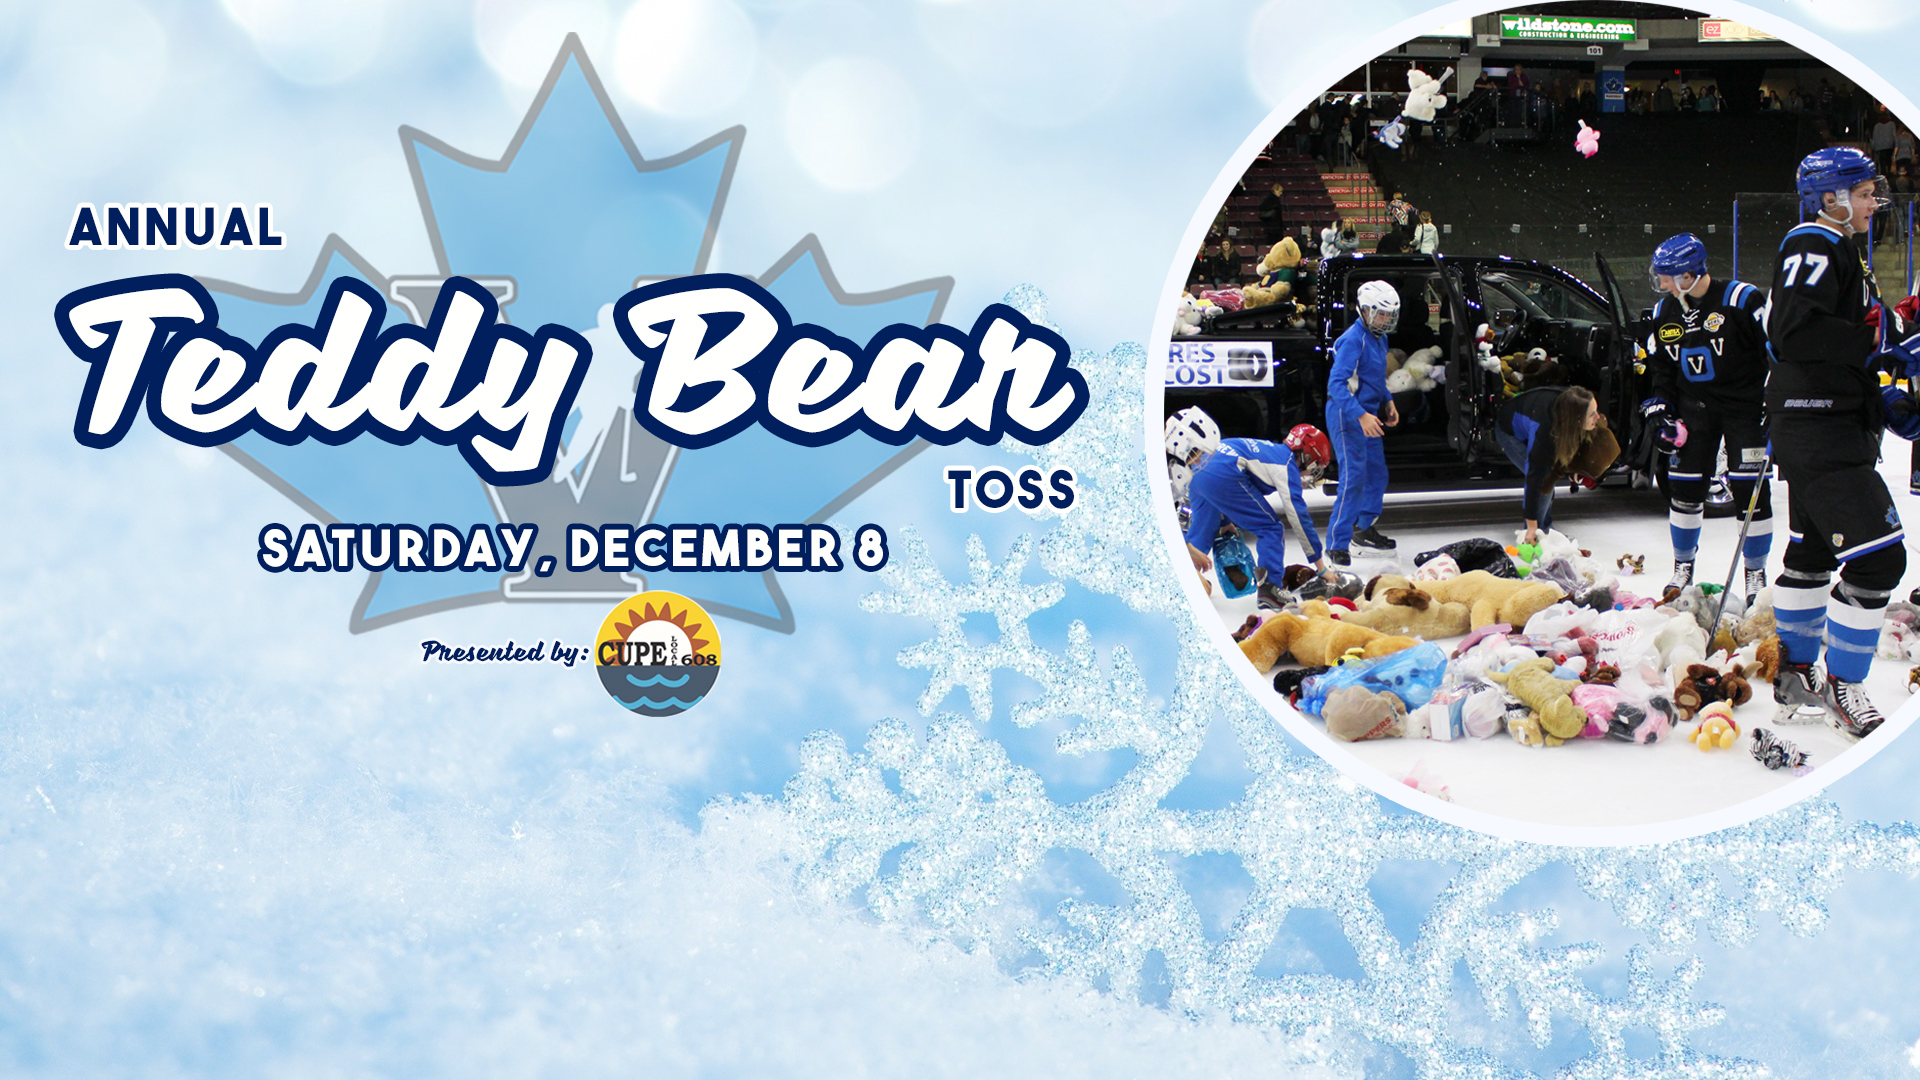 Penticton Vees Annual Teddy Bear Toss at the South Okanagan Events Centre on Saturday, December 8, 2018